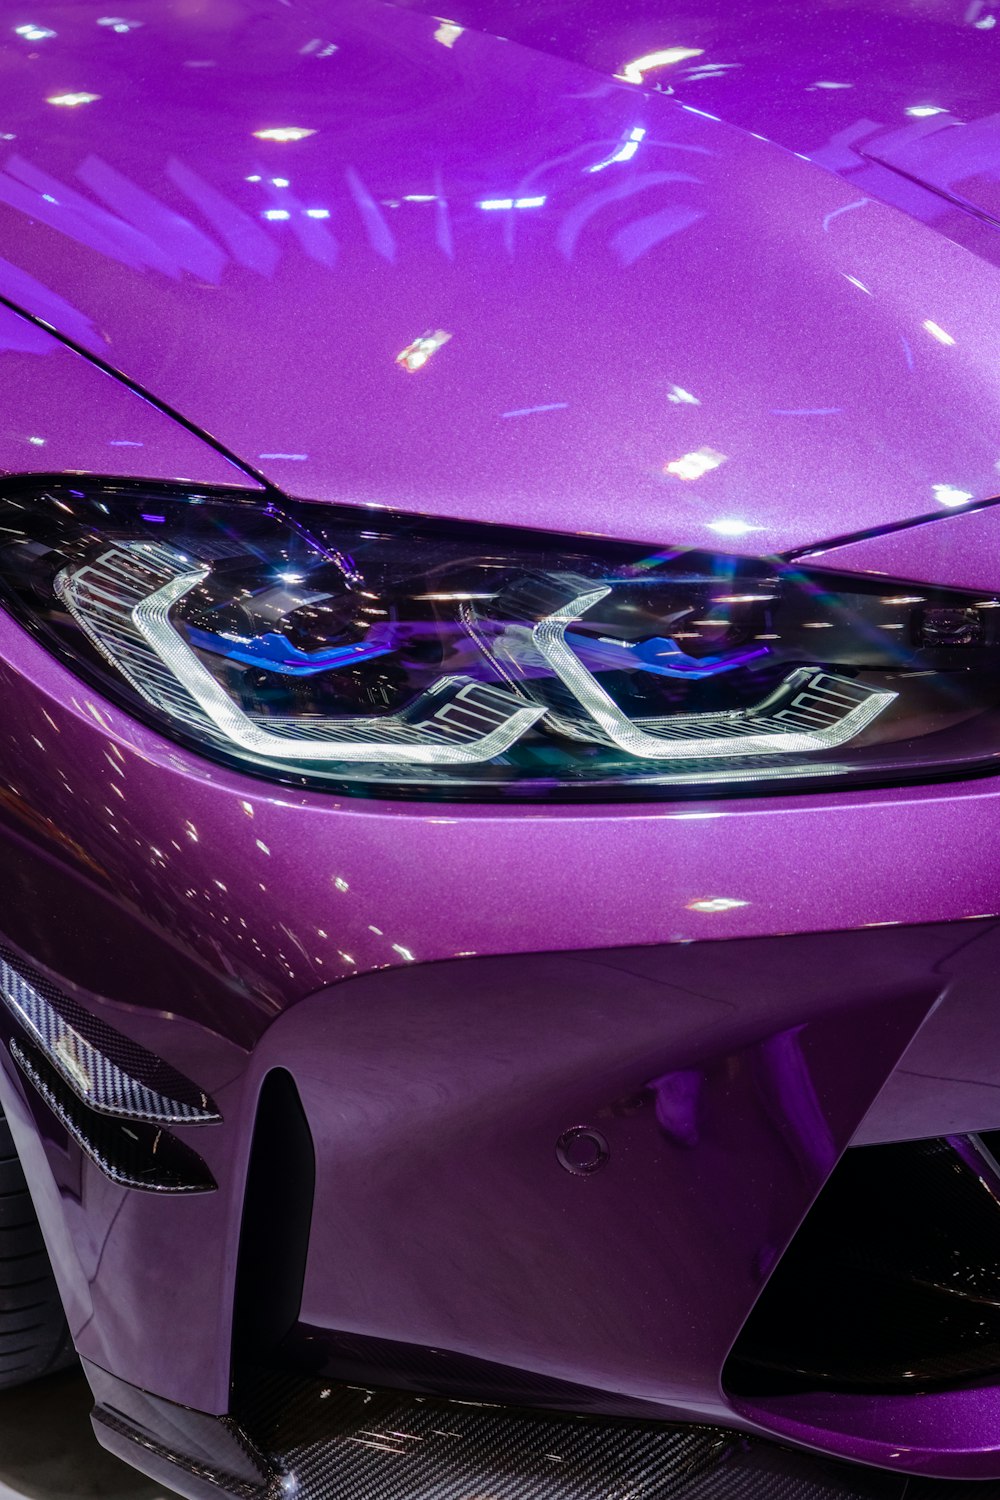 a close up of the front of a purple sports car